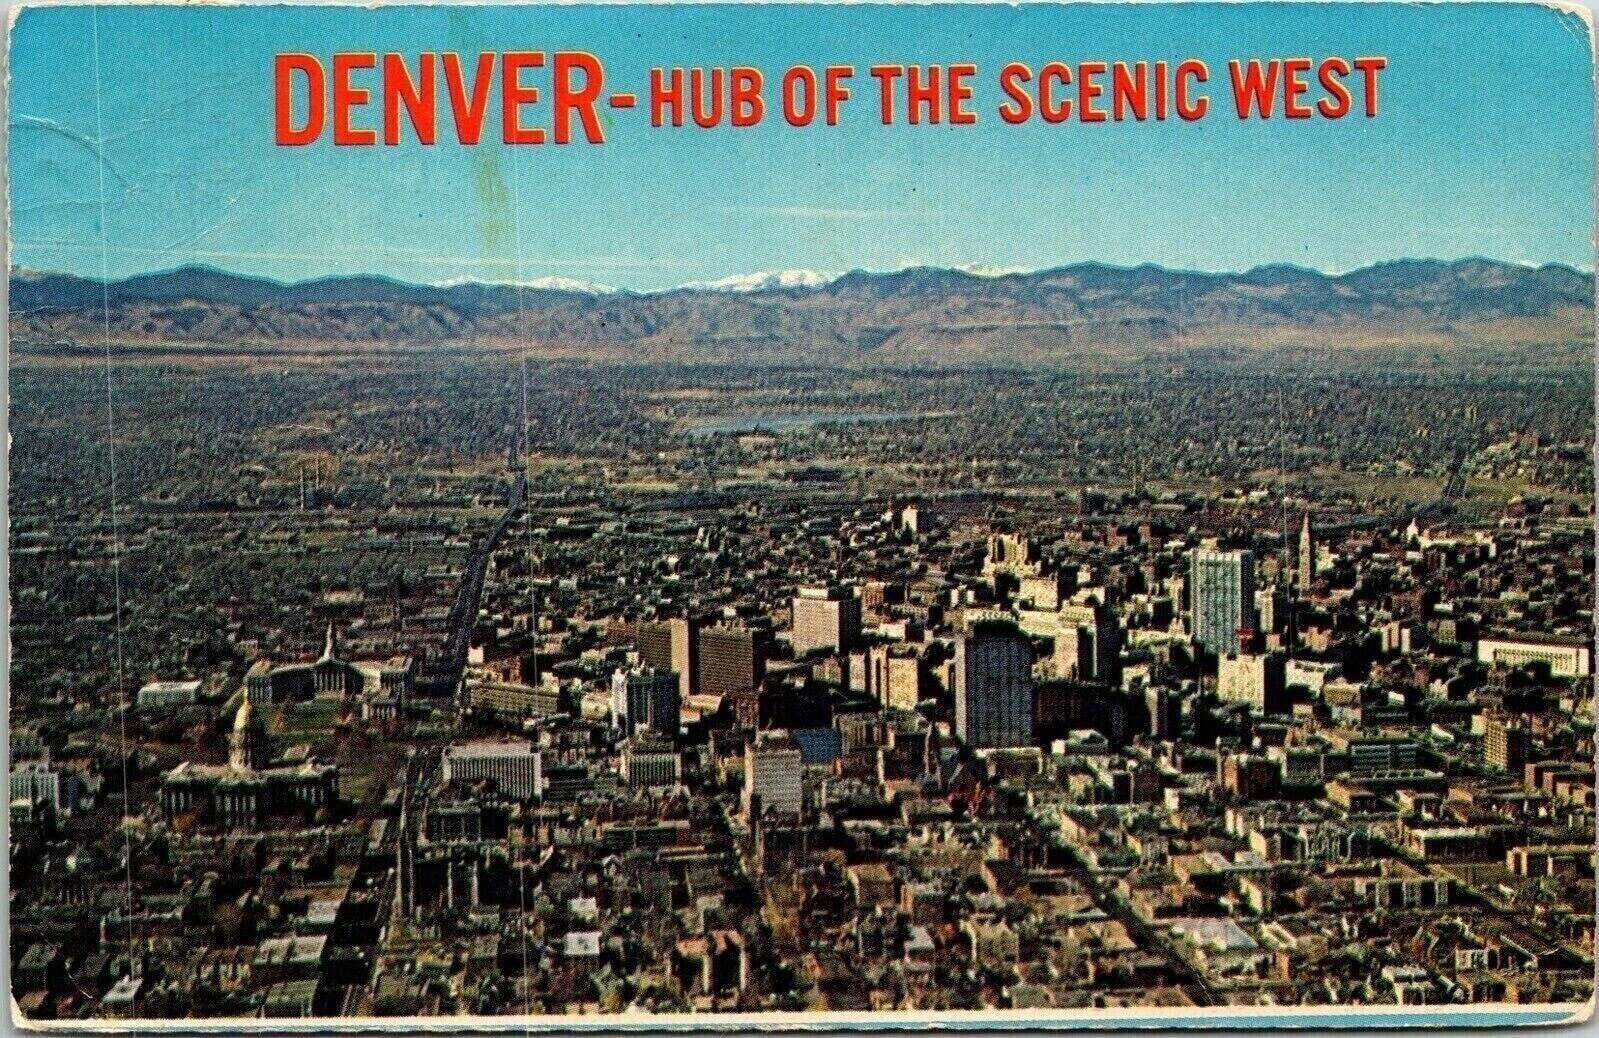 Denver Hub Scenic West Aerial View Colorado CO Postcard Cancel PM Clean WOB Note